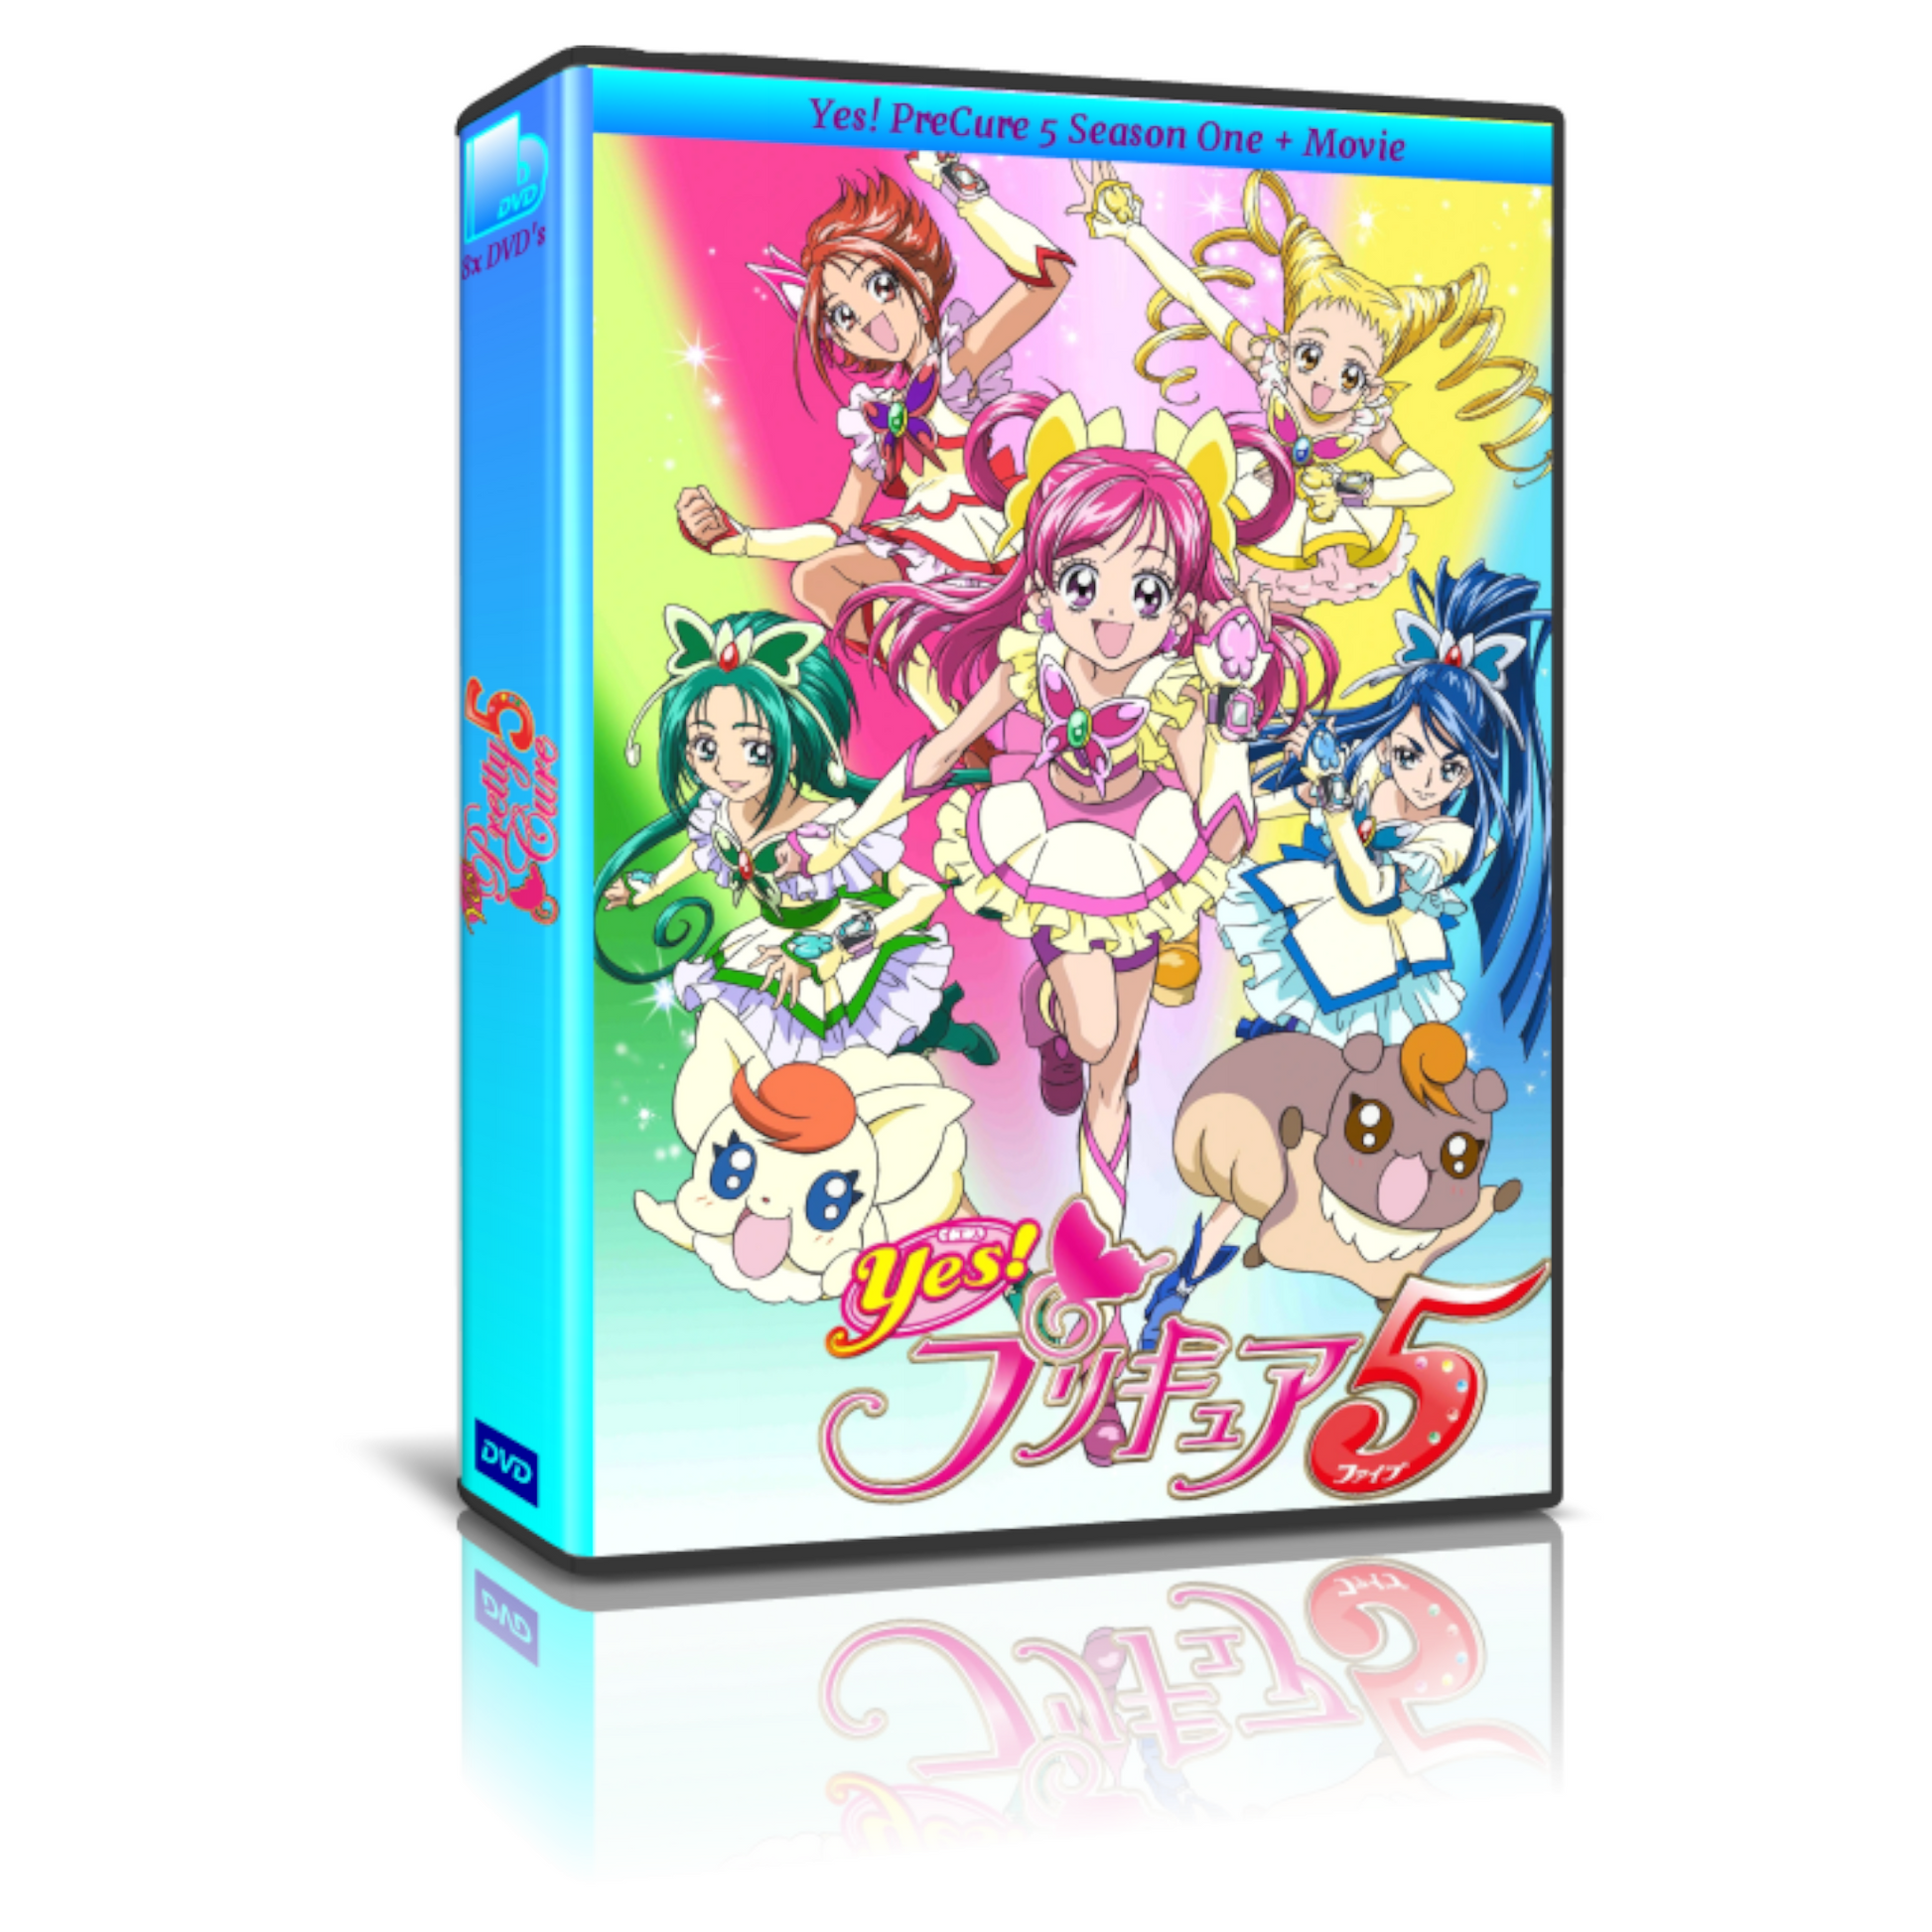 Yes! PreCure 5 Complete Anime TV Series & Movie DVD Set - RetroAnimation 